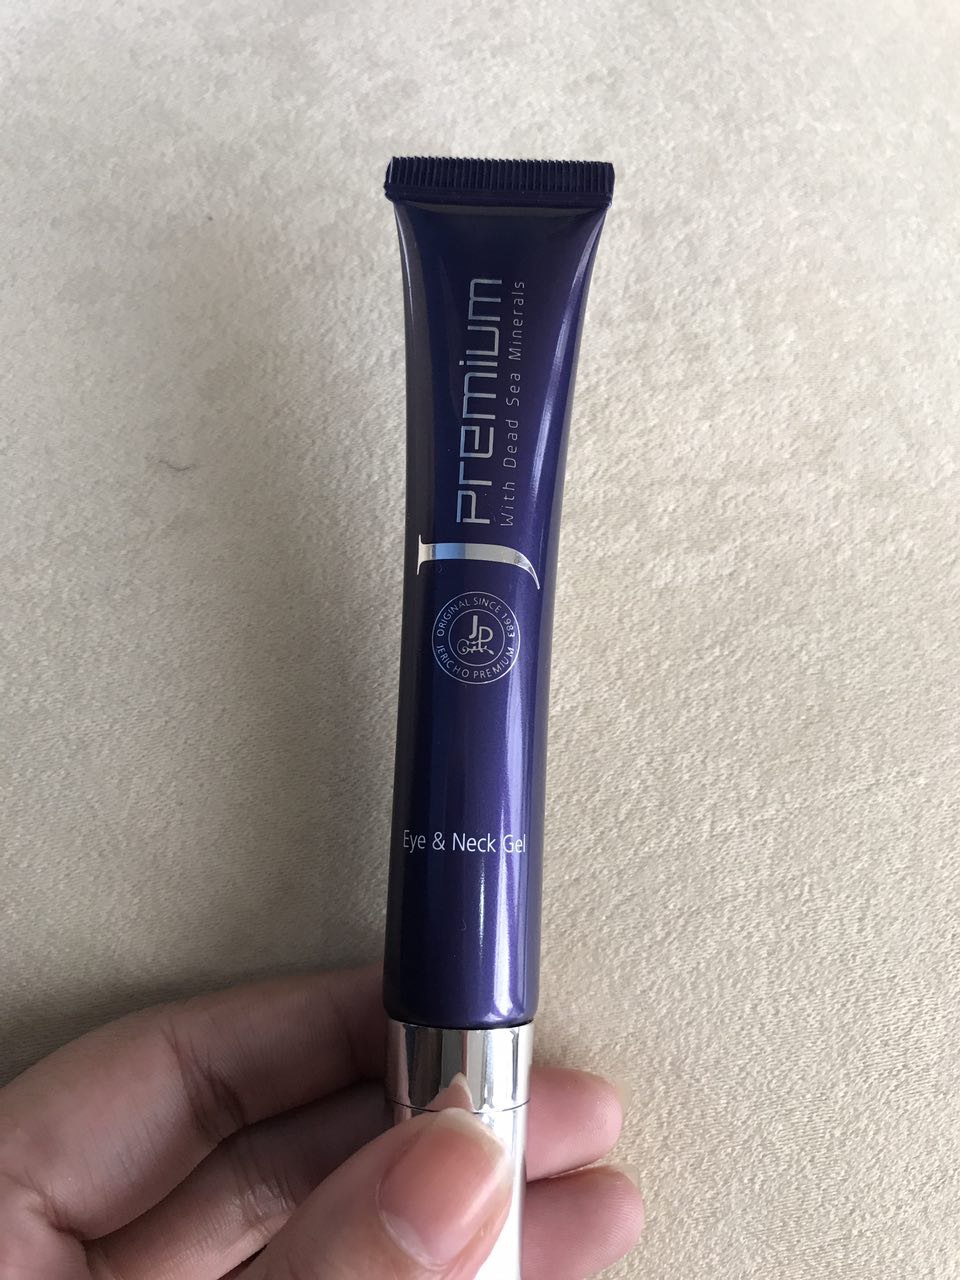 Contents of Jericho Premium Eye and Neck Gel